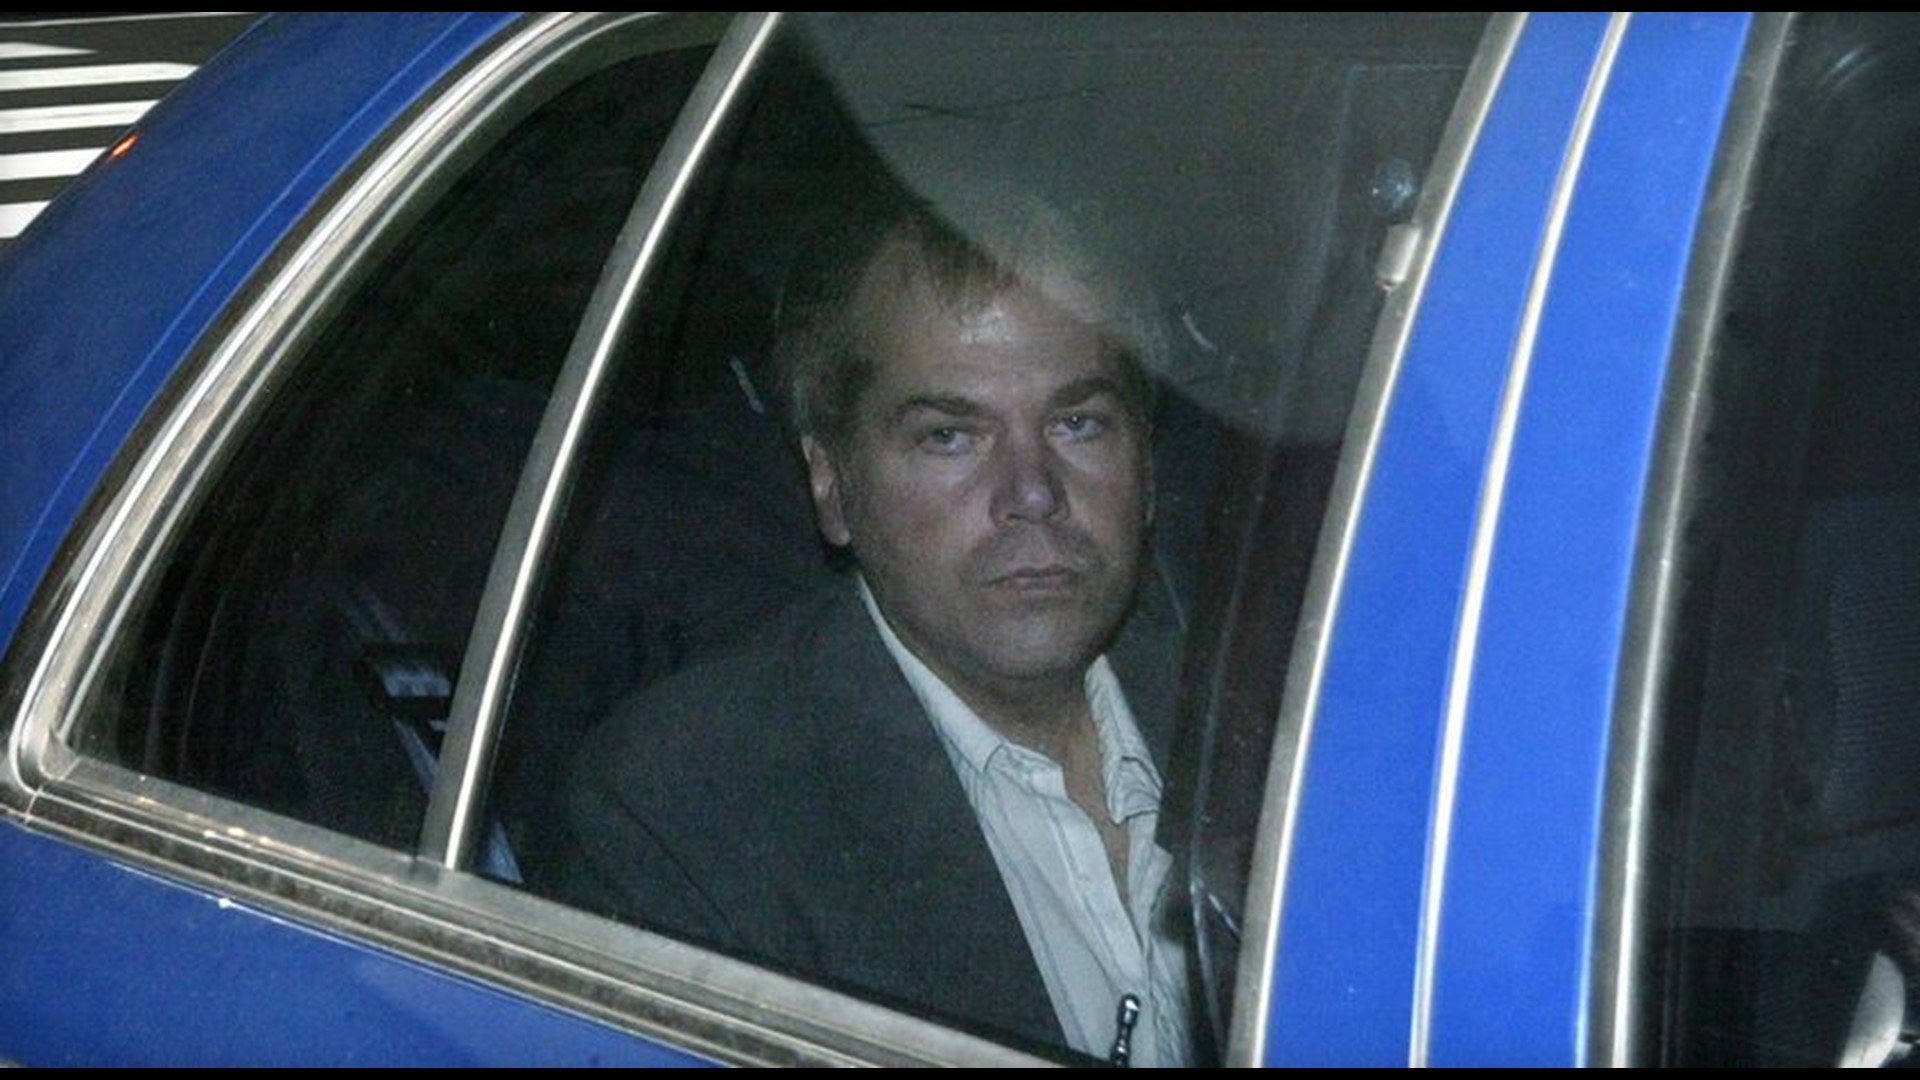 John Hinckley Jr. shot and wounded President Reagan in 1981. The lifting of all restrictions had been expected since late September.